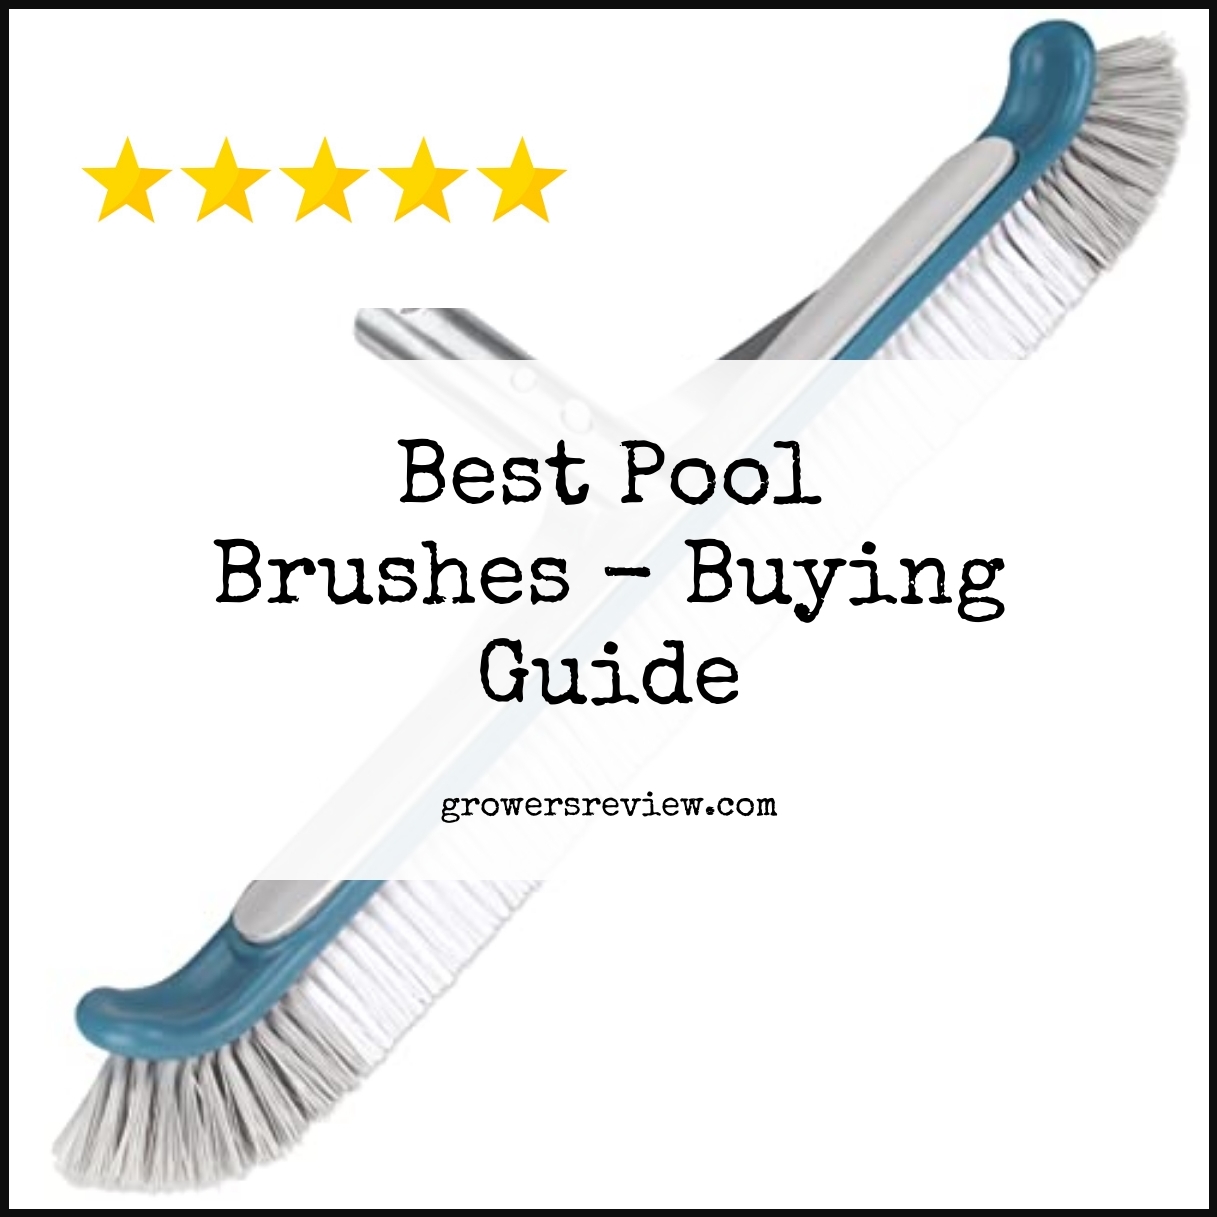 Best Pool Brushes - Buying Guide